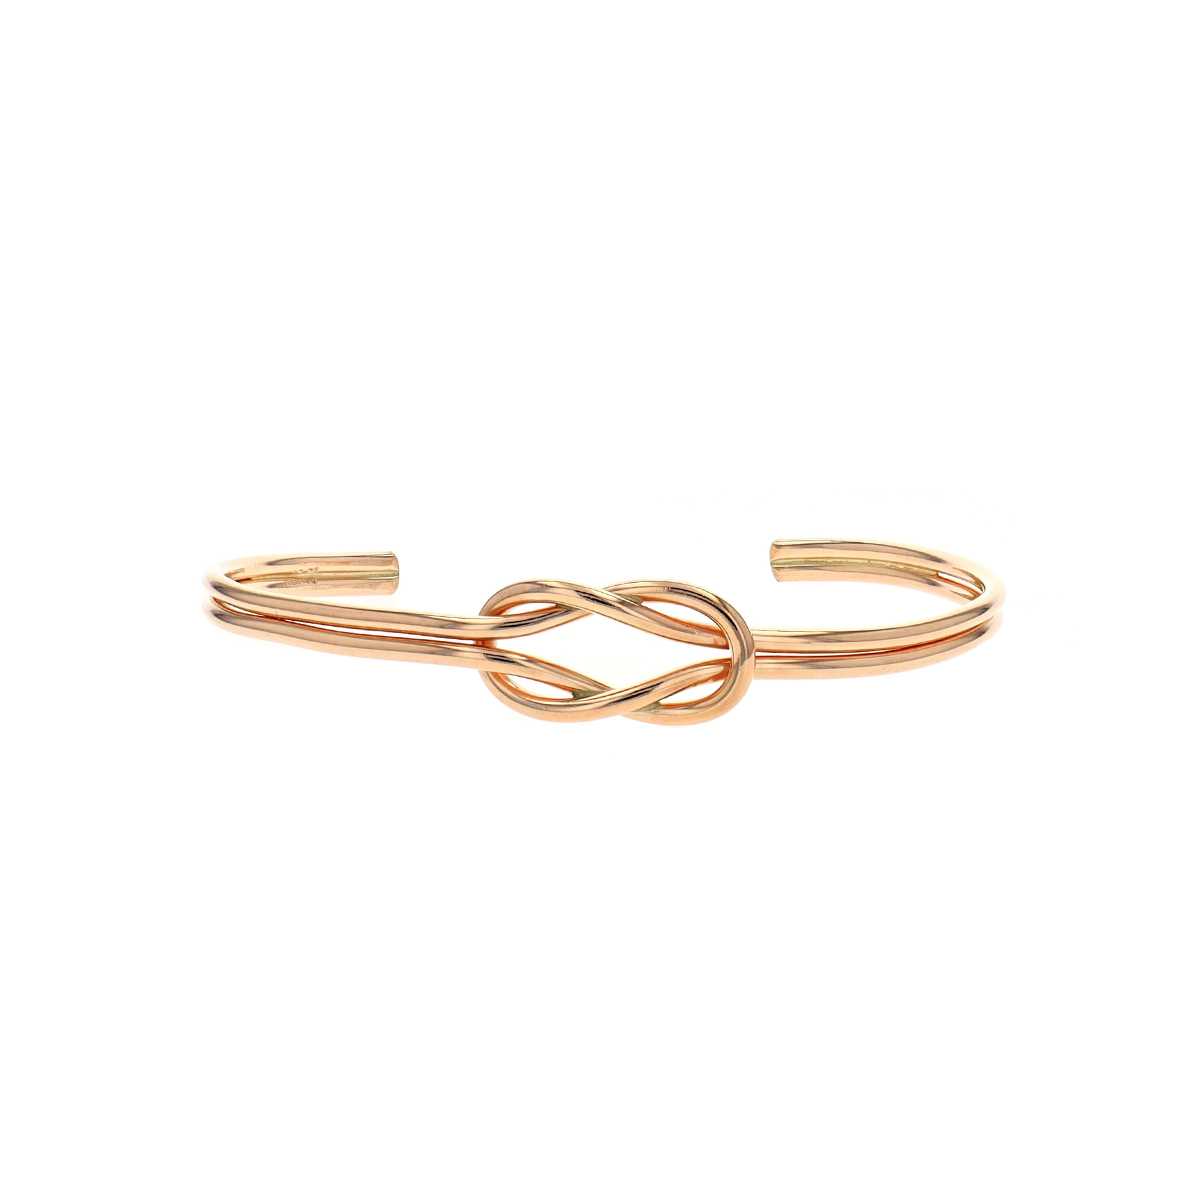 Gold Filled Knotted Cuff Bracelet